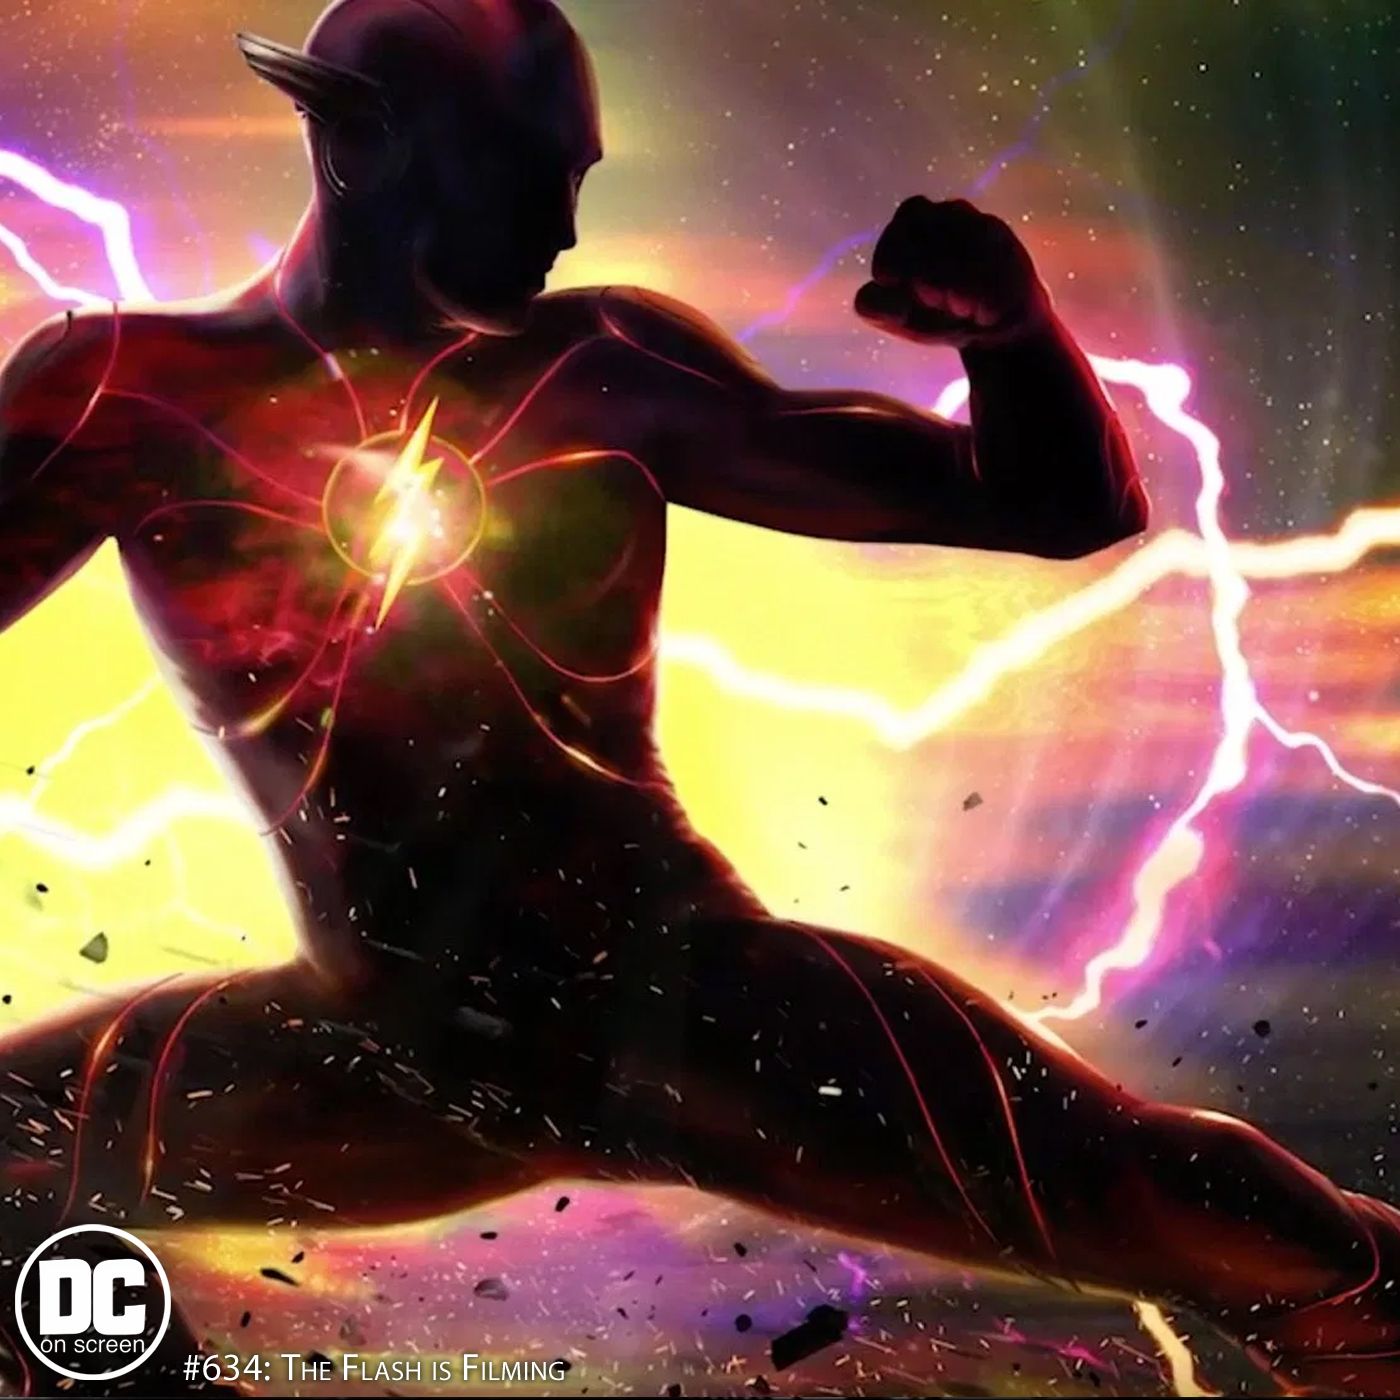 ’The Flash’ is Filming | News 04-23-21